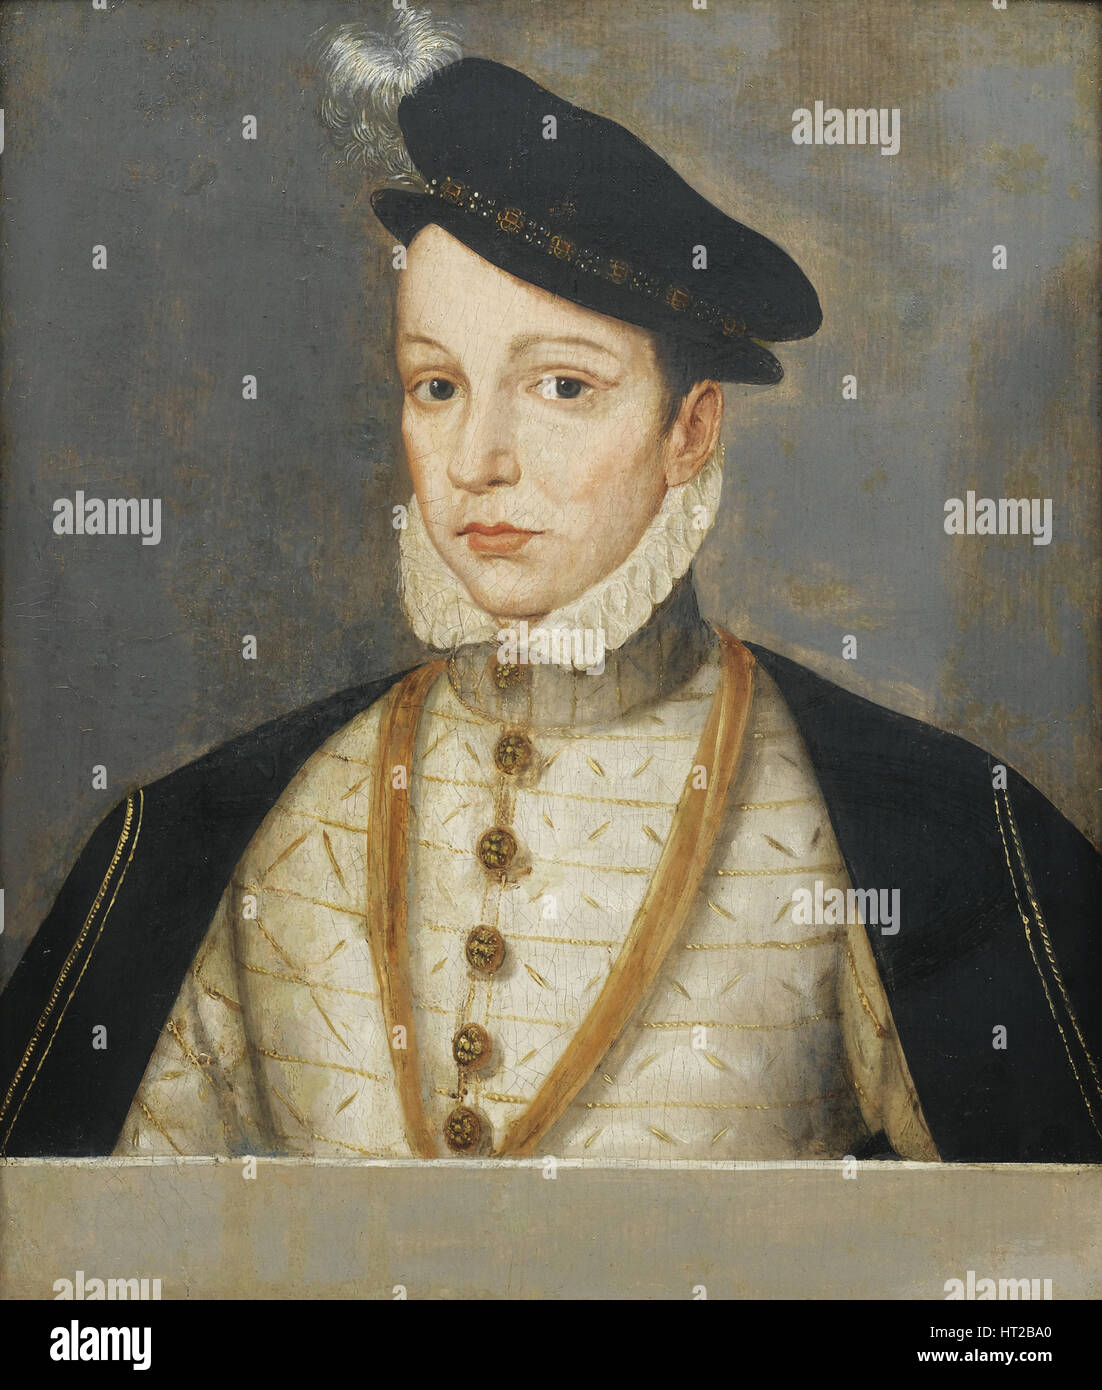 Portrait of King Charles IX of France (1550-1574), End of 16th century. Artist: Clouet, François, (School) Stock Photo